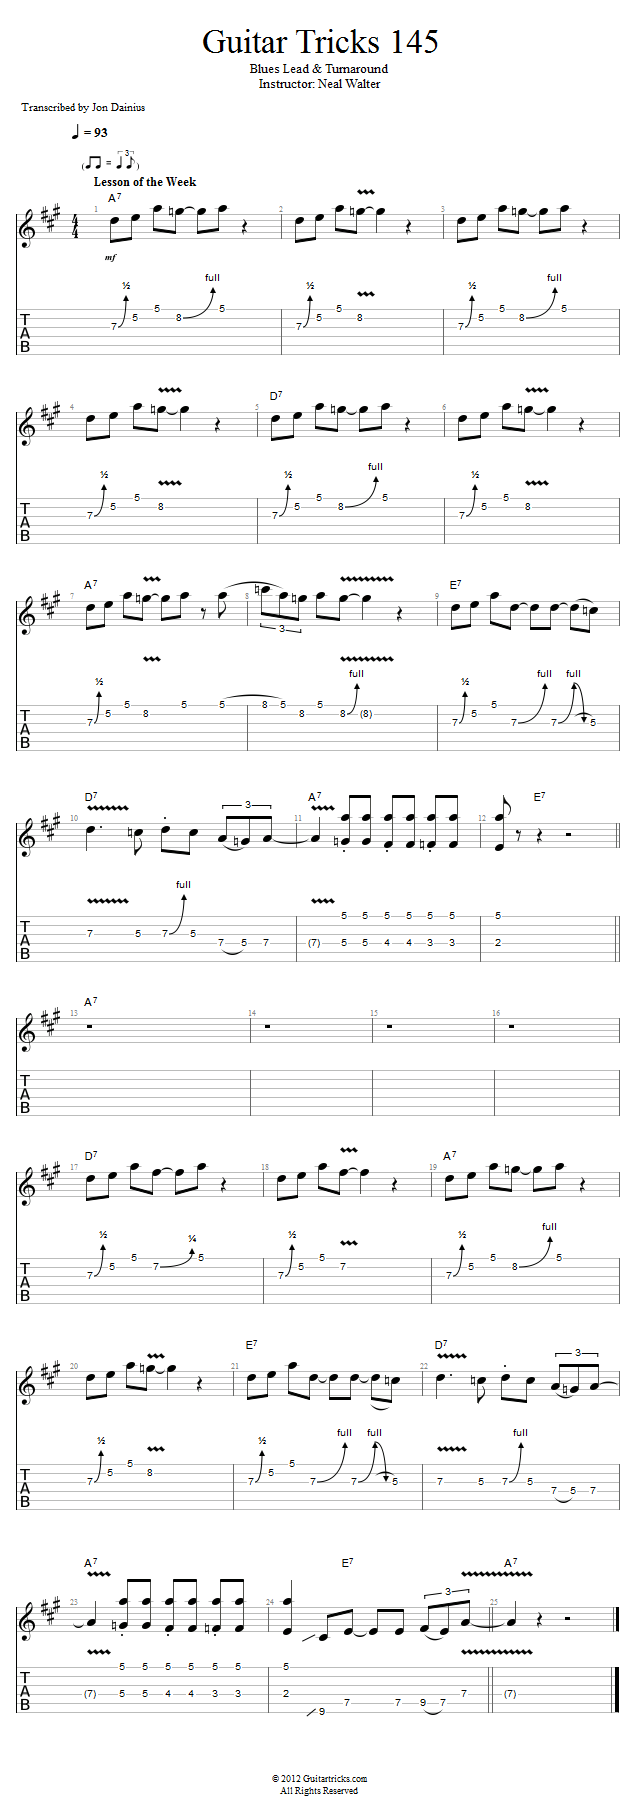 Guitar Tricks 145: Blues Lead & Turnaround song notation